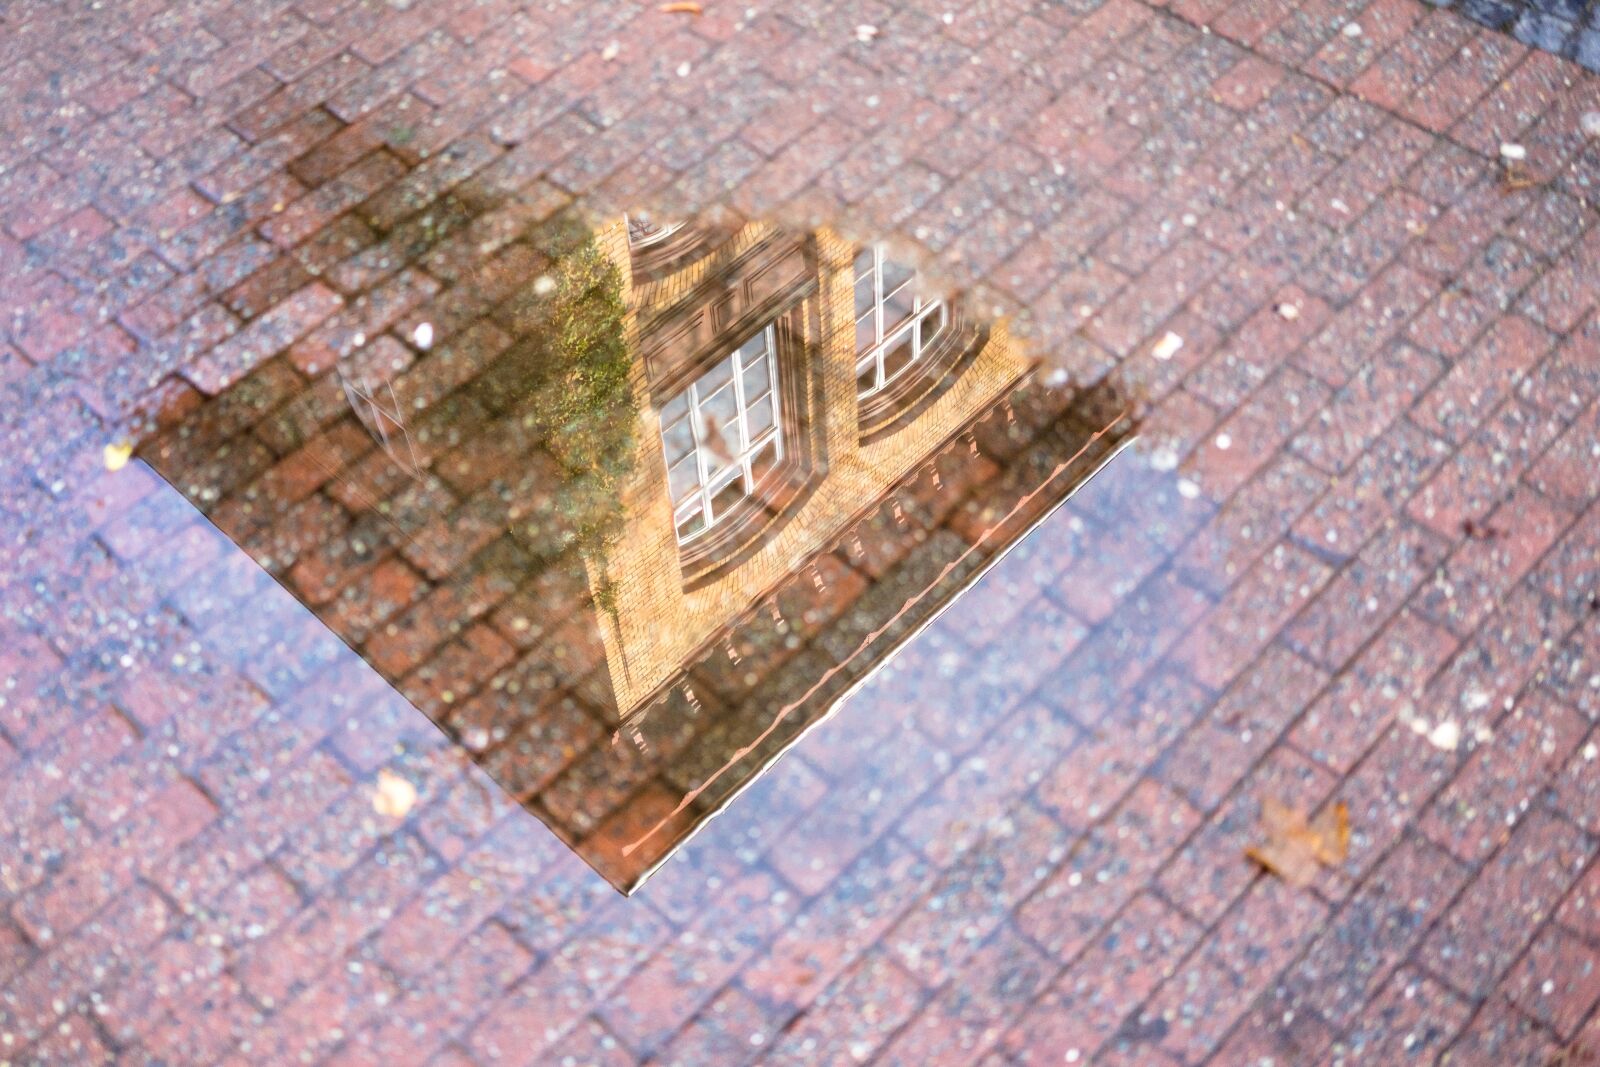 Sony a7 sample photo. Mirroring, puddle, building photography